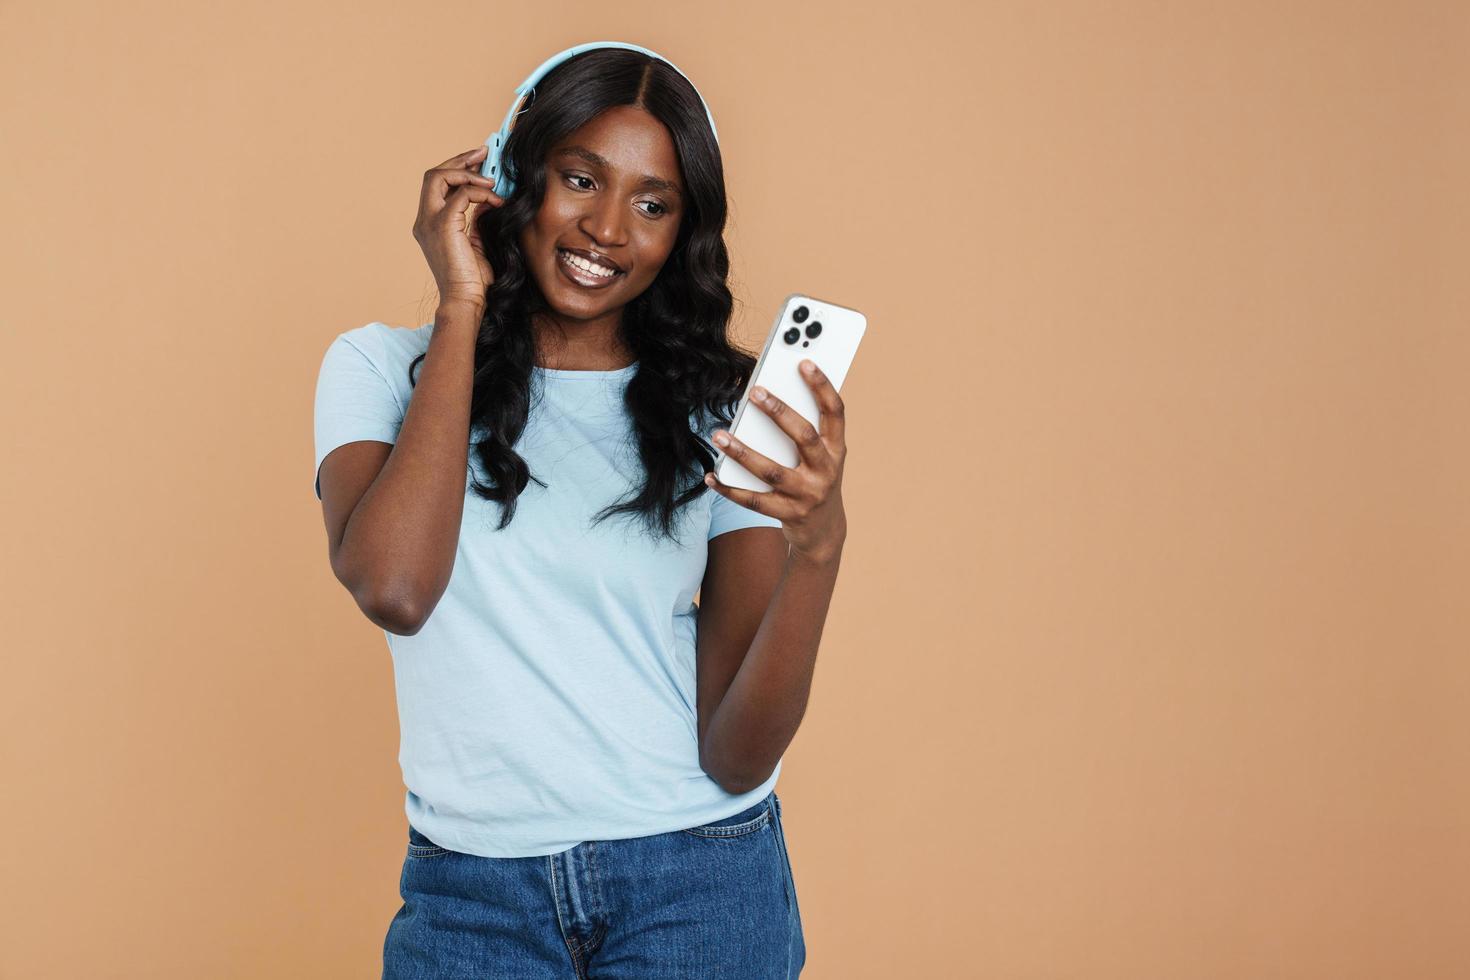 Smiling African woman texting by phone with headphones photo